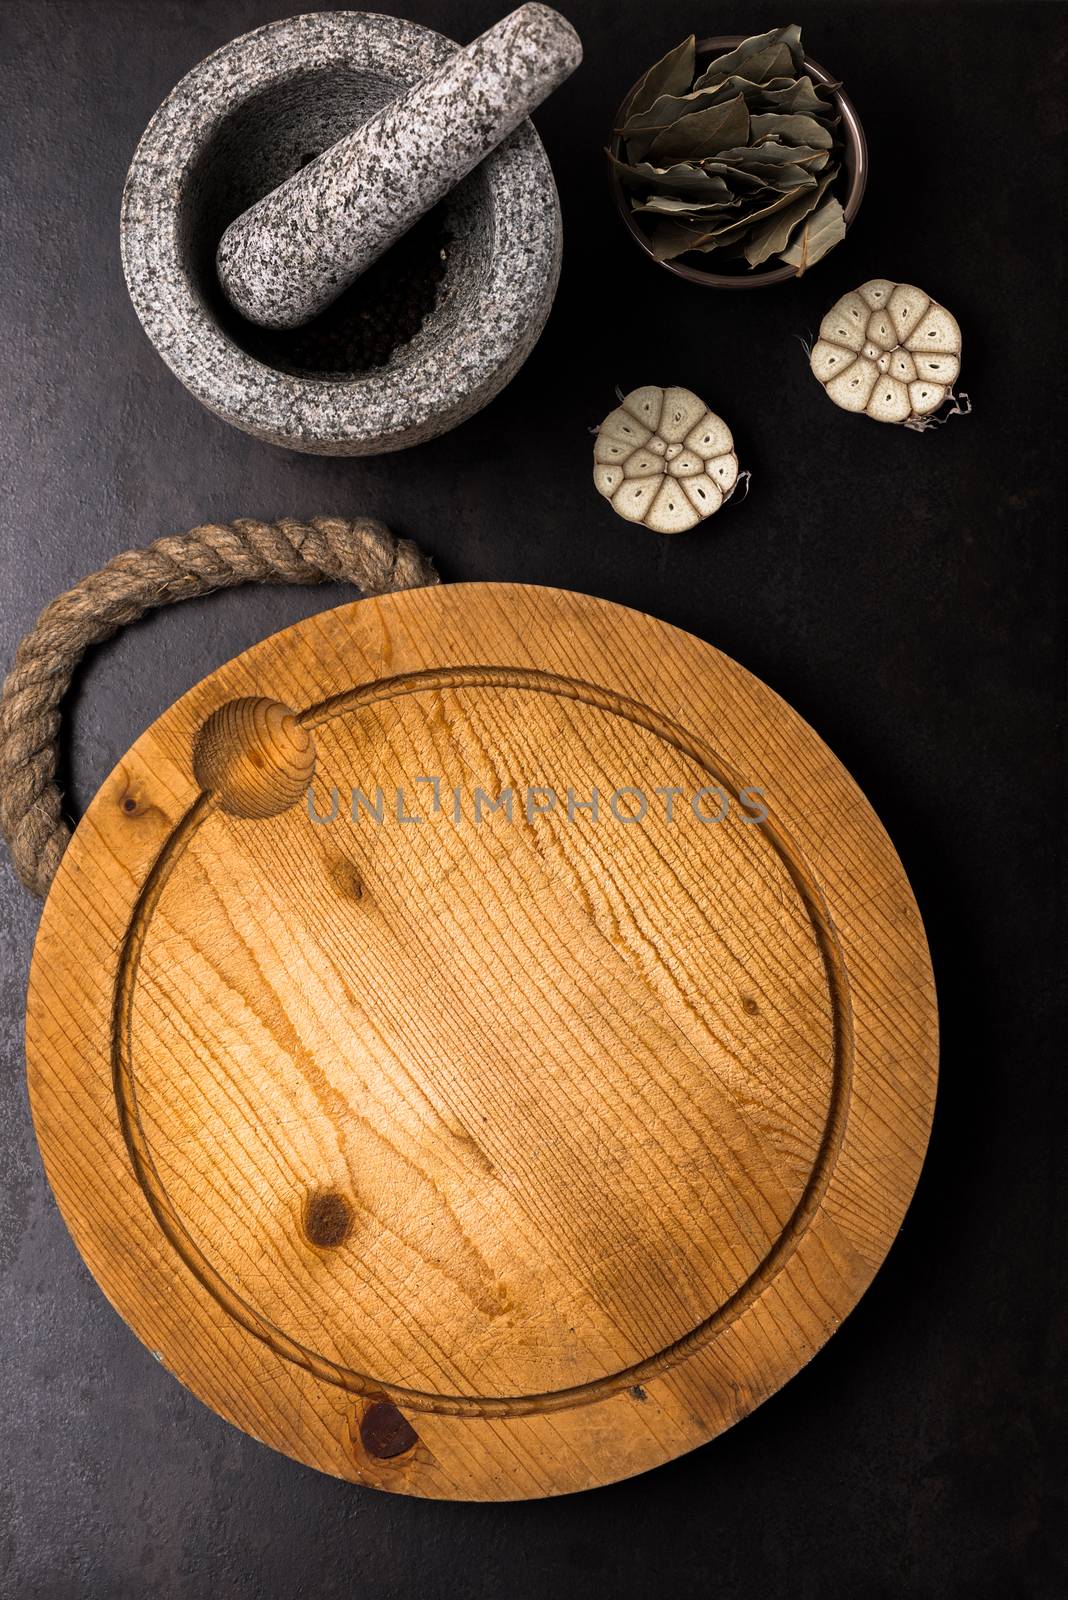 Stone mortar bowl with pestle garlic bay leaf and wooden cutting board by Nanisimova